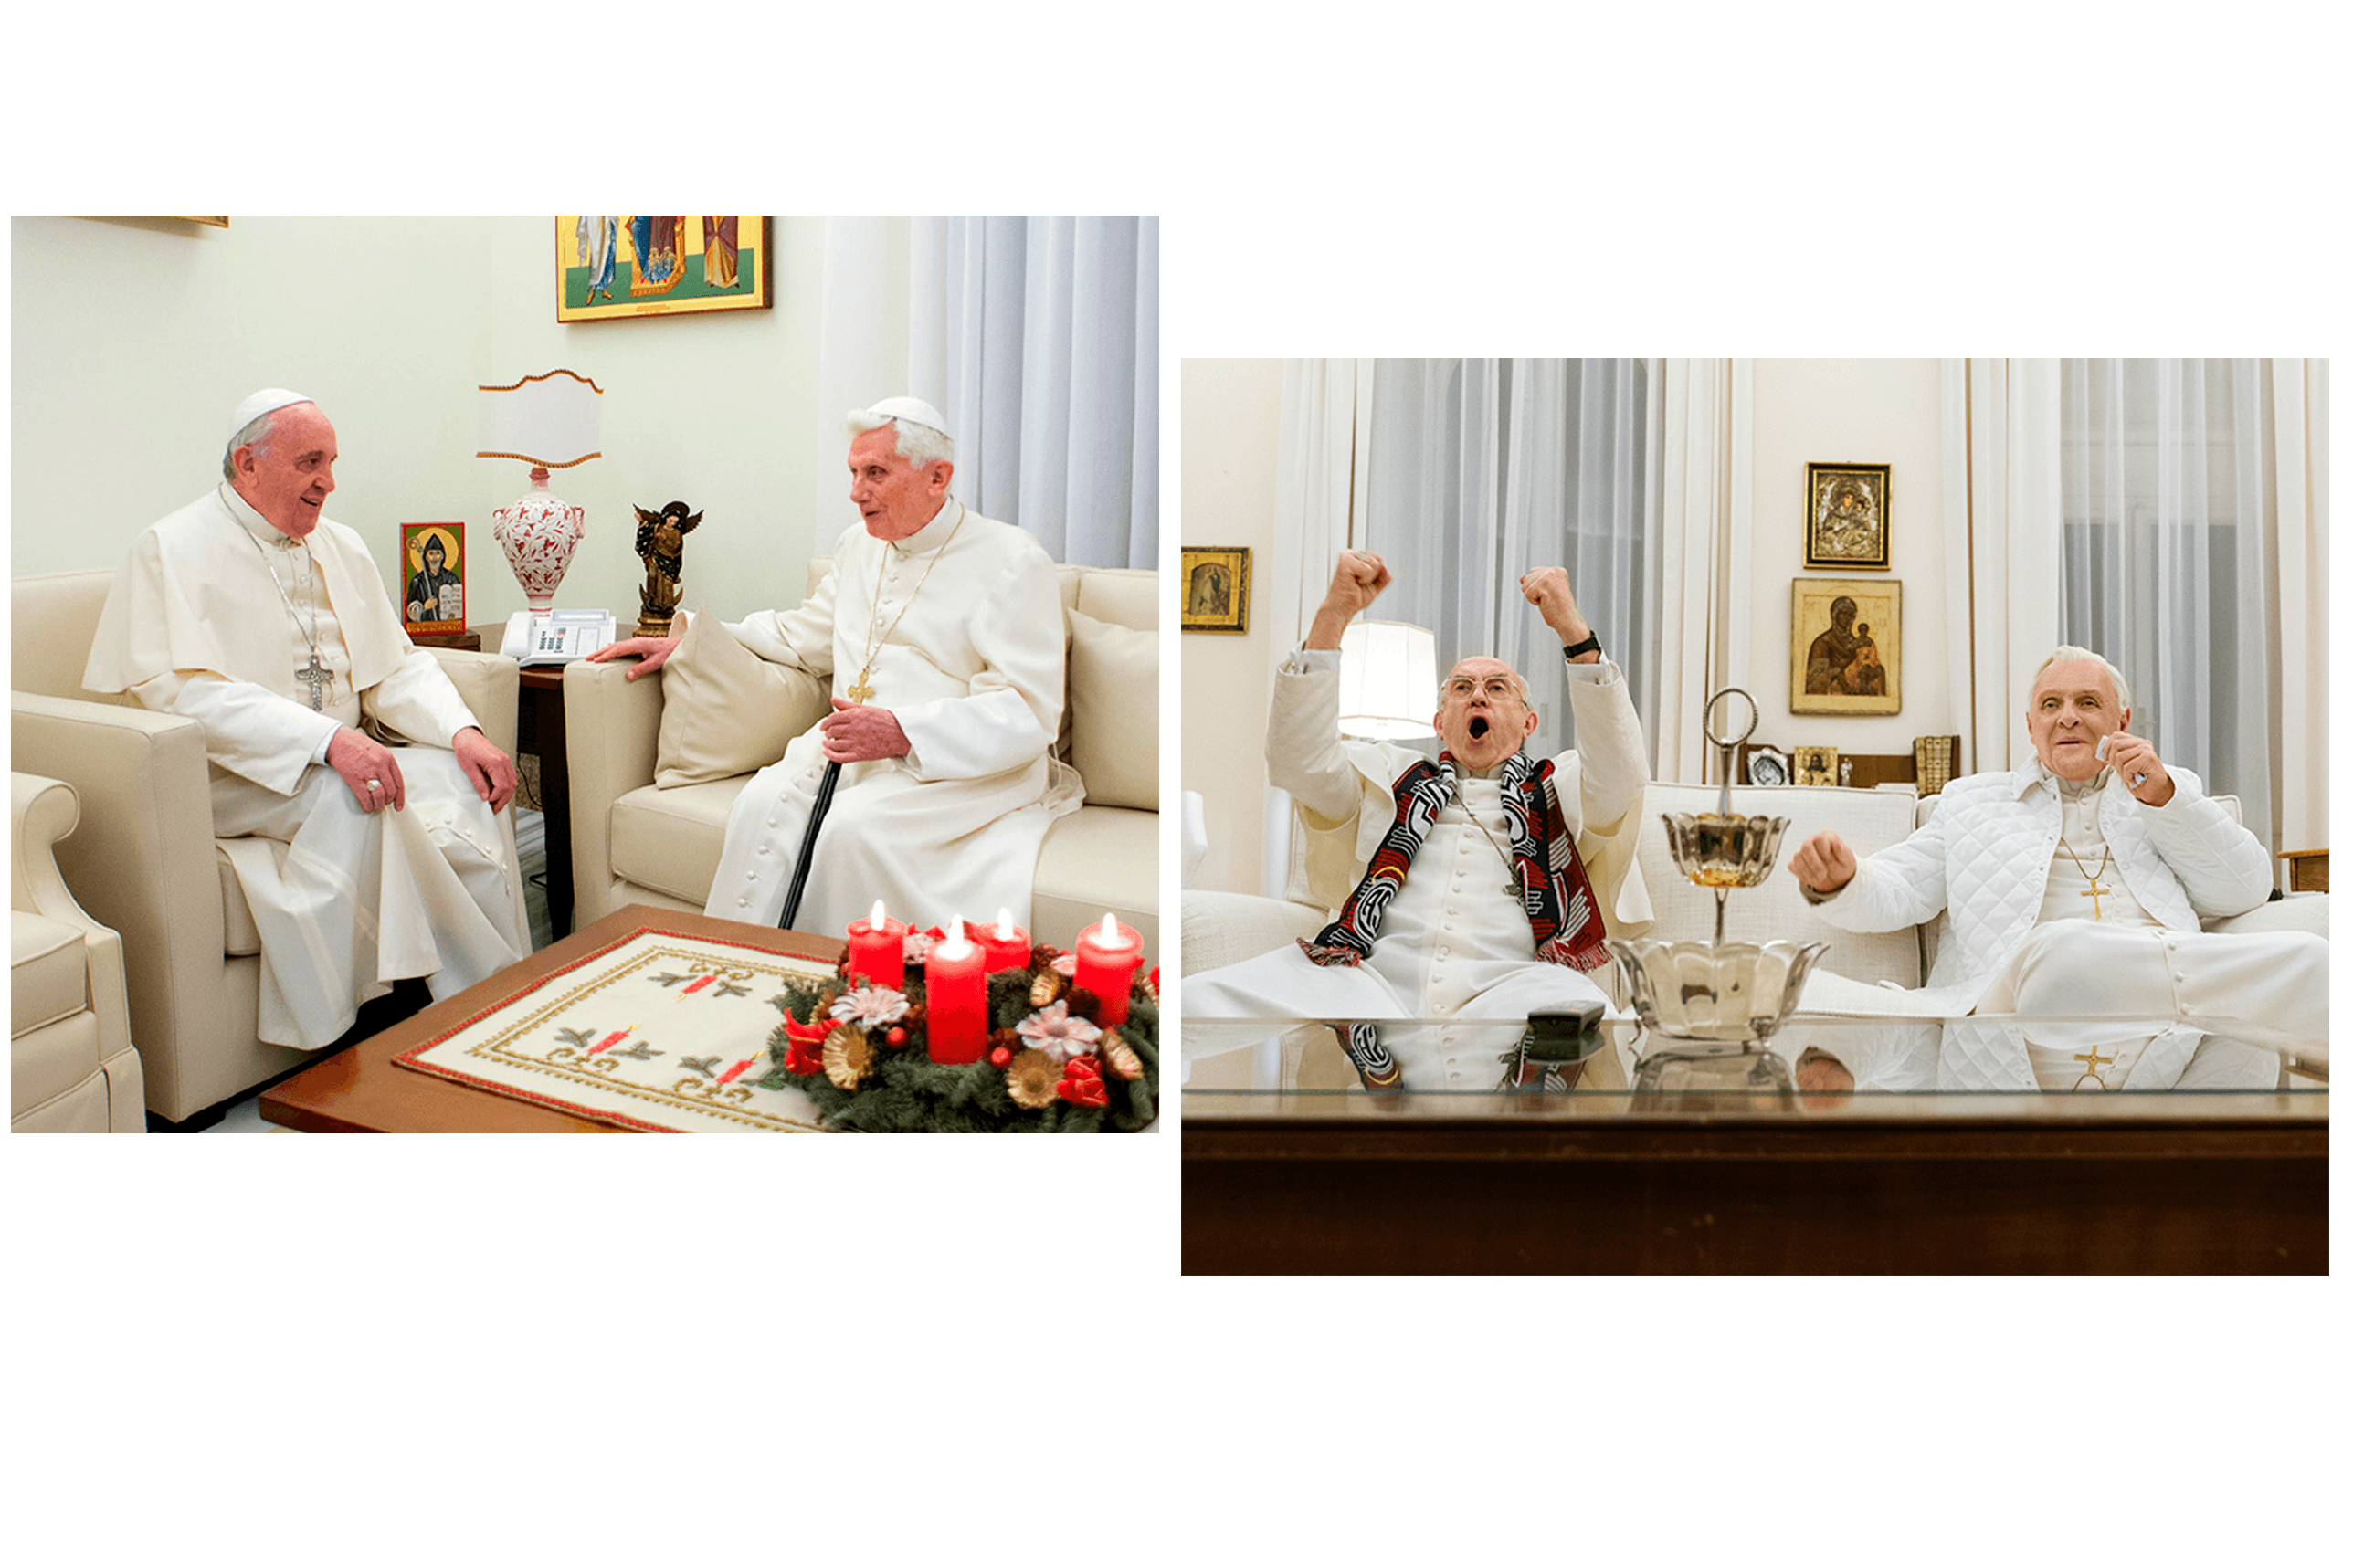 The Two Popes: What Actually Happened When Francis Met